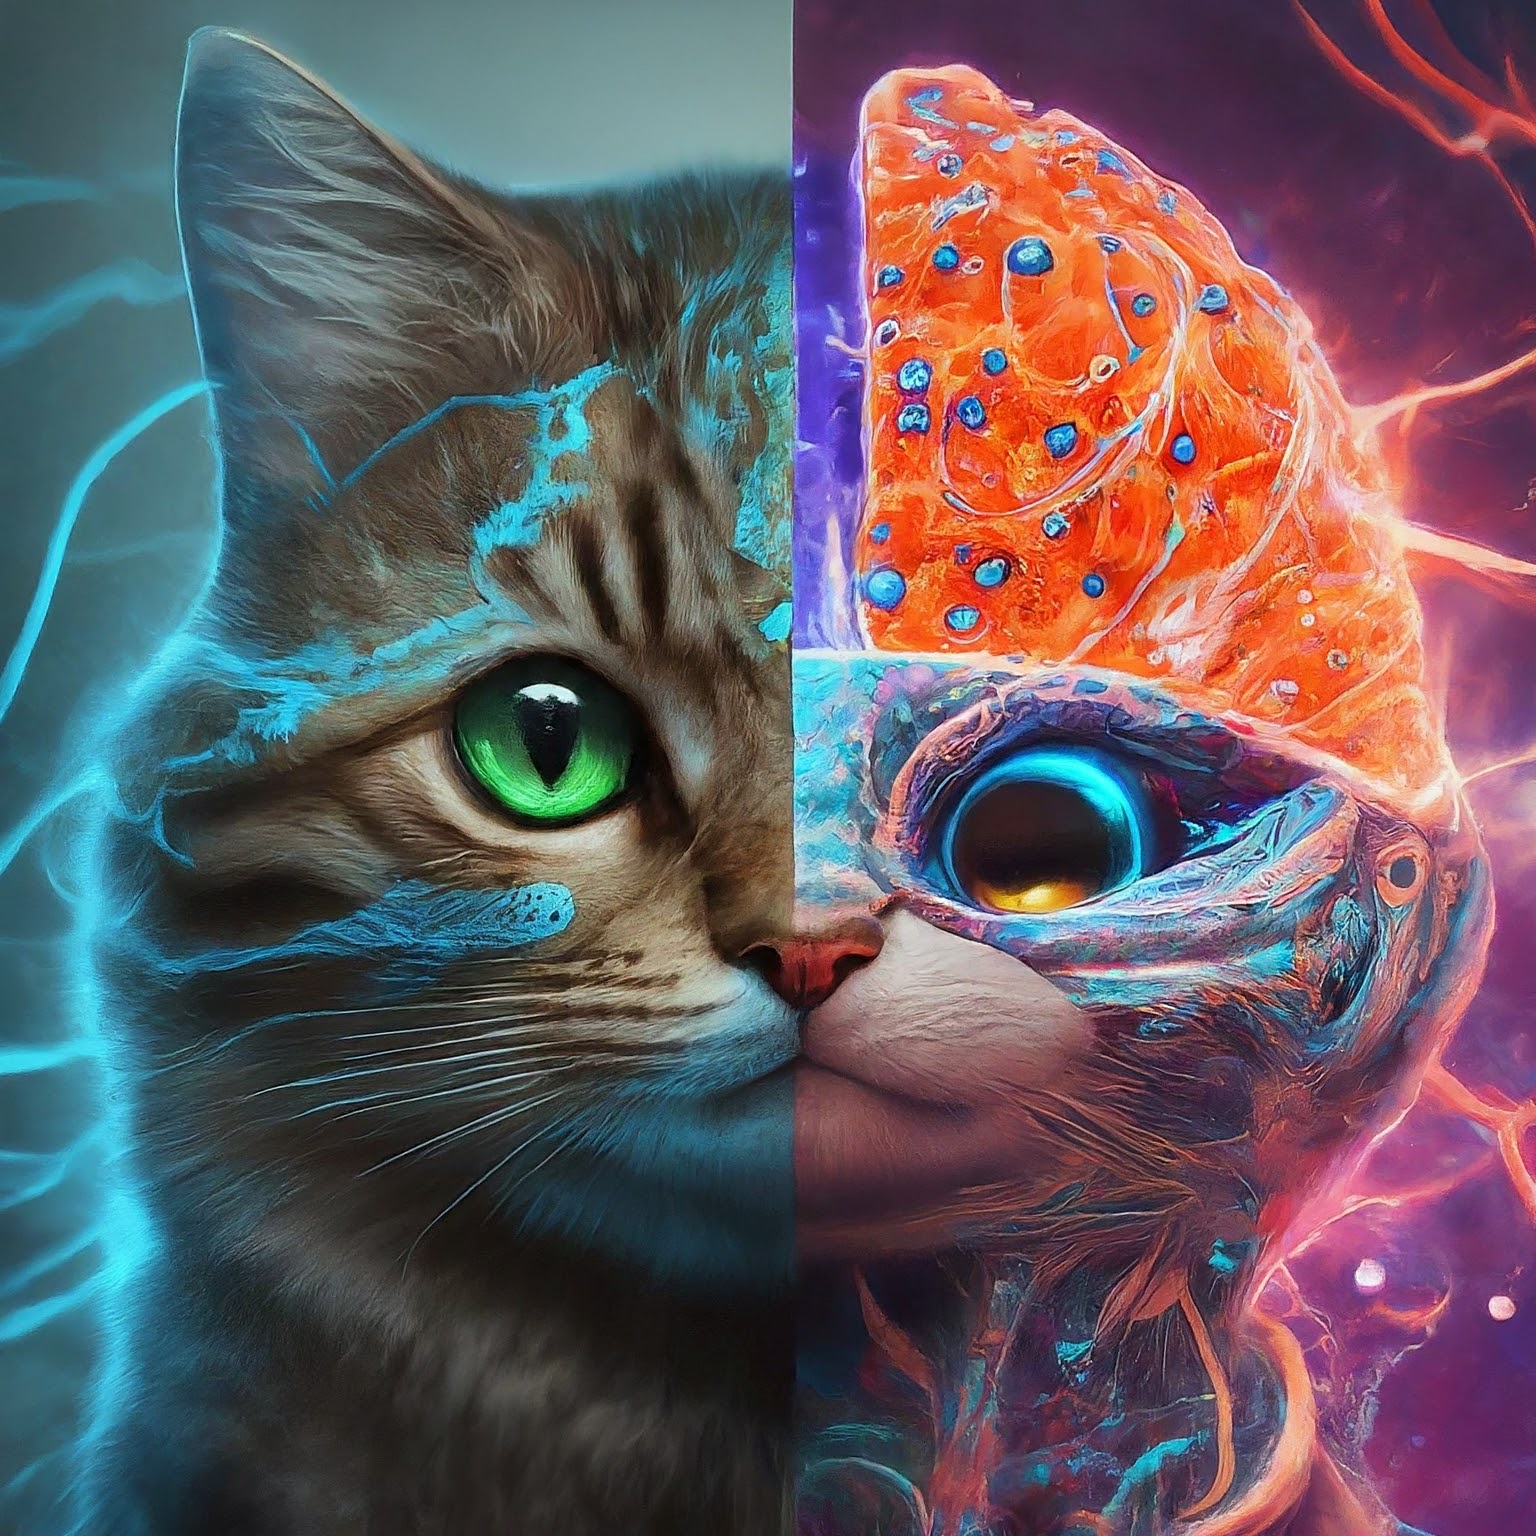 Cat Videos to Cancer Cure? Deep Learning's MIND-BLOWING Potential & HIDDEN Ethical Dilemmas!